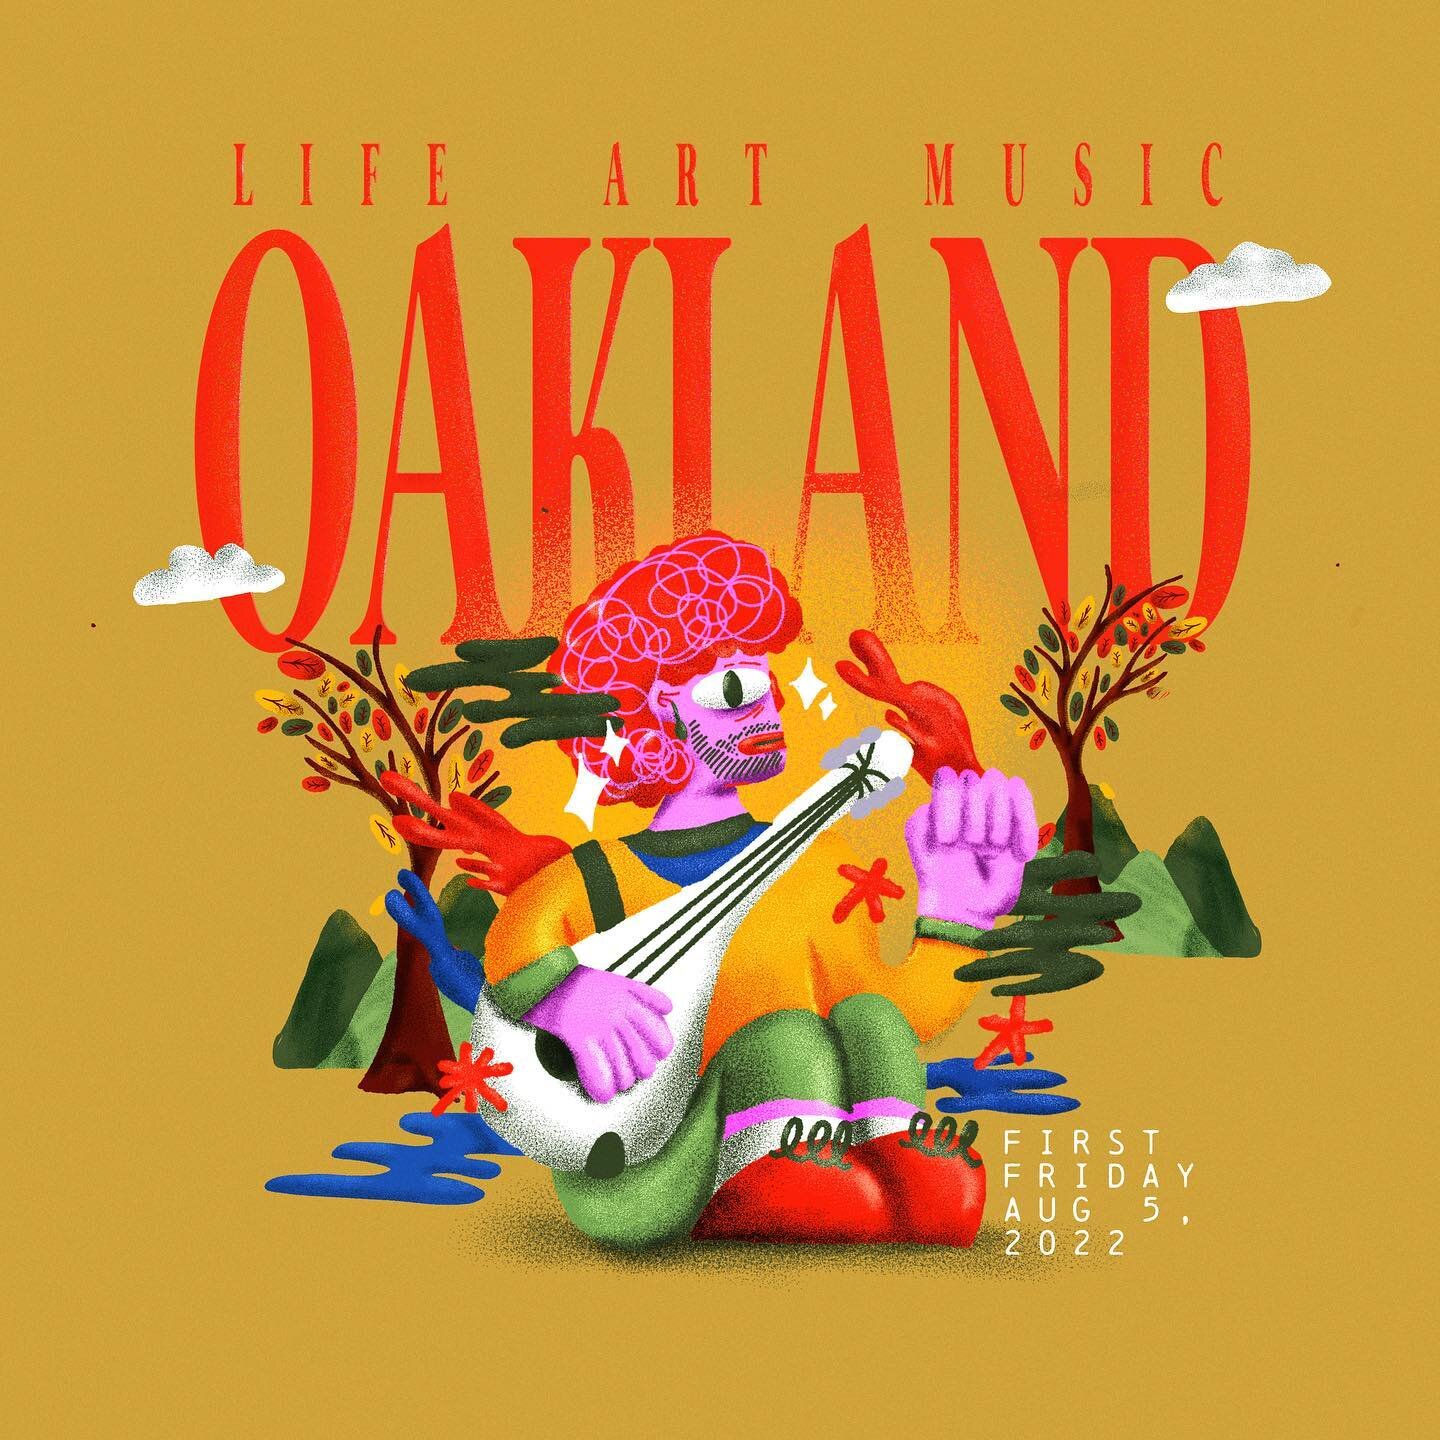 NFT Illustration commission for Non-Fungible Oakland @0xoakland @oakfirstfridays @opensea 

I have a few months living in the bay but Oakland is not just a city, is a feeling. Oakland is a hub of creativity and talent, life and change. 

Grateful of 